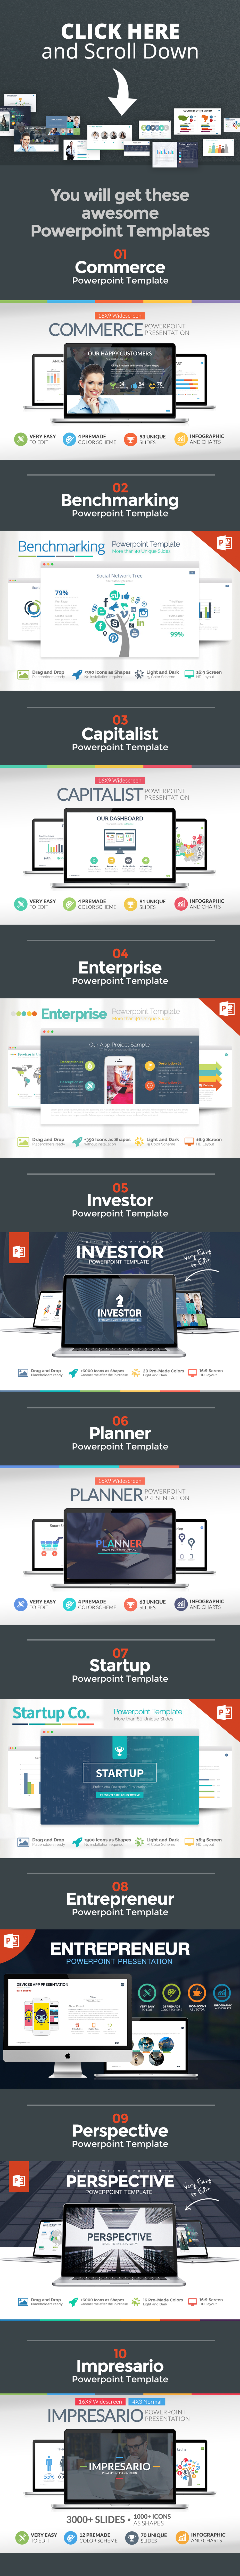 powerpoint template louis twelve Jetfabrik Designs corporate designs Analytics Report Sales Commerce Economy Infographics microsoft office templates Free Powerpoint Template Portfolio Minimal iPad iPhone iMac Macbook Vector Icons Flat keynote business Pitch Deck Slide Marketing Company Overview Creative Powerpoint Template